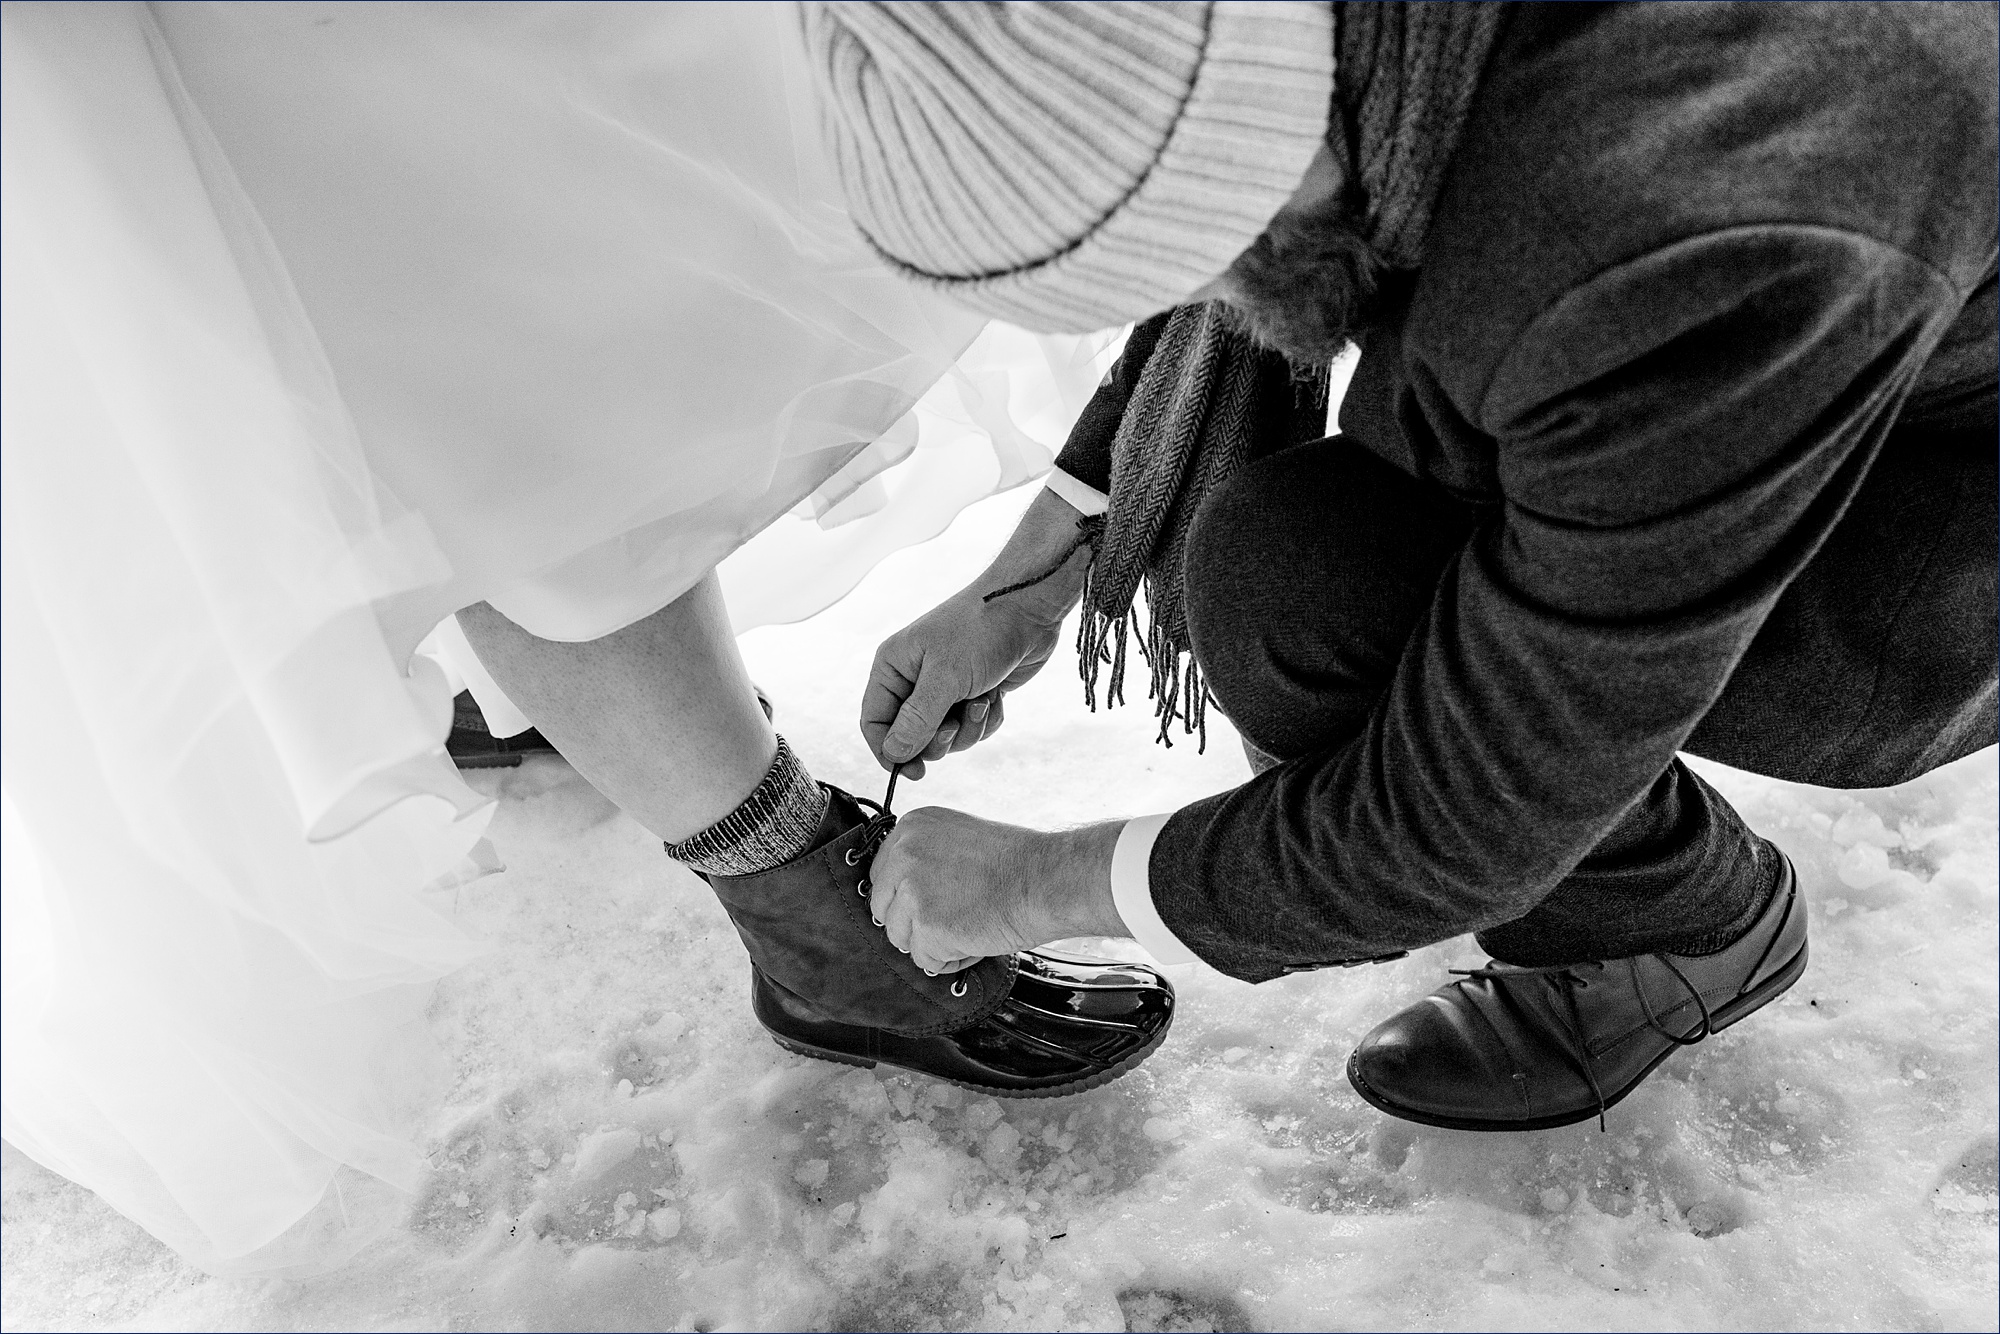 The groom ties the bride's boots for her on their winter NH elopement